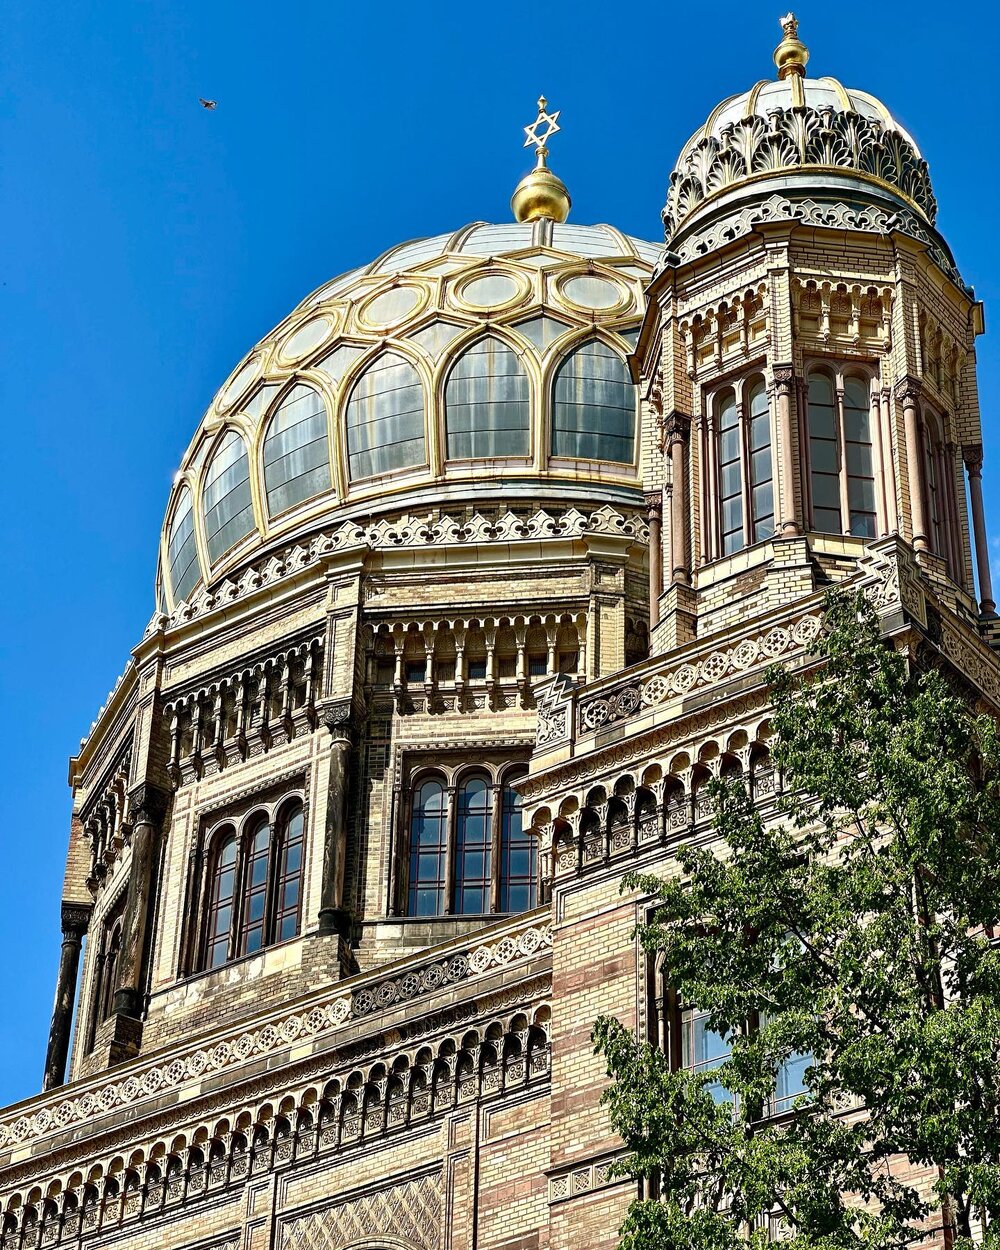 🕍 Berlin&rsquo;s Moorish-style New Synagogue

This ornate place or worship was the source of great pride for the Jewish community in the 1860s

It was seems as a symbol of growing acceptance of the Jewish community within the Prussian capital

The b